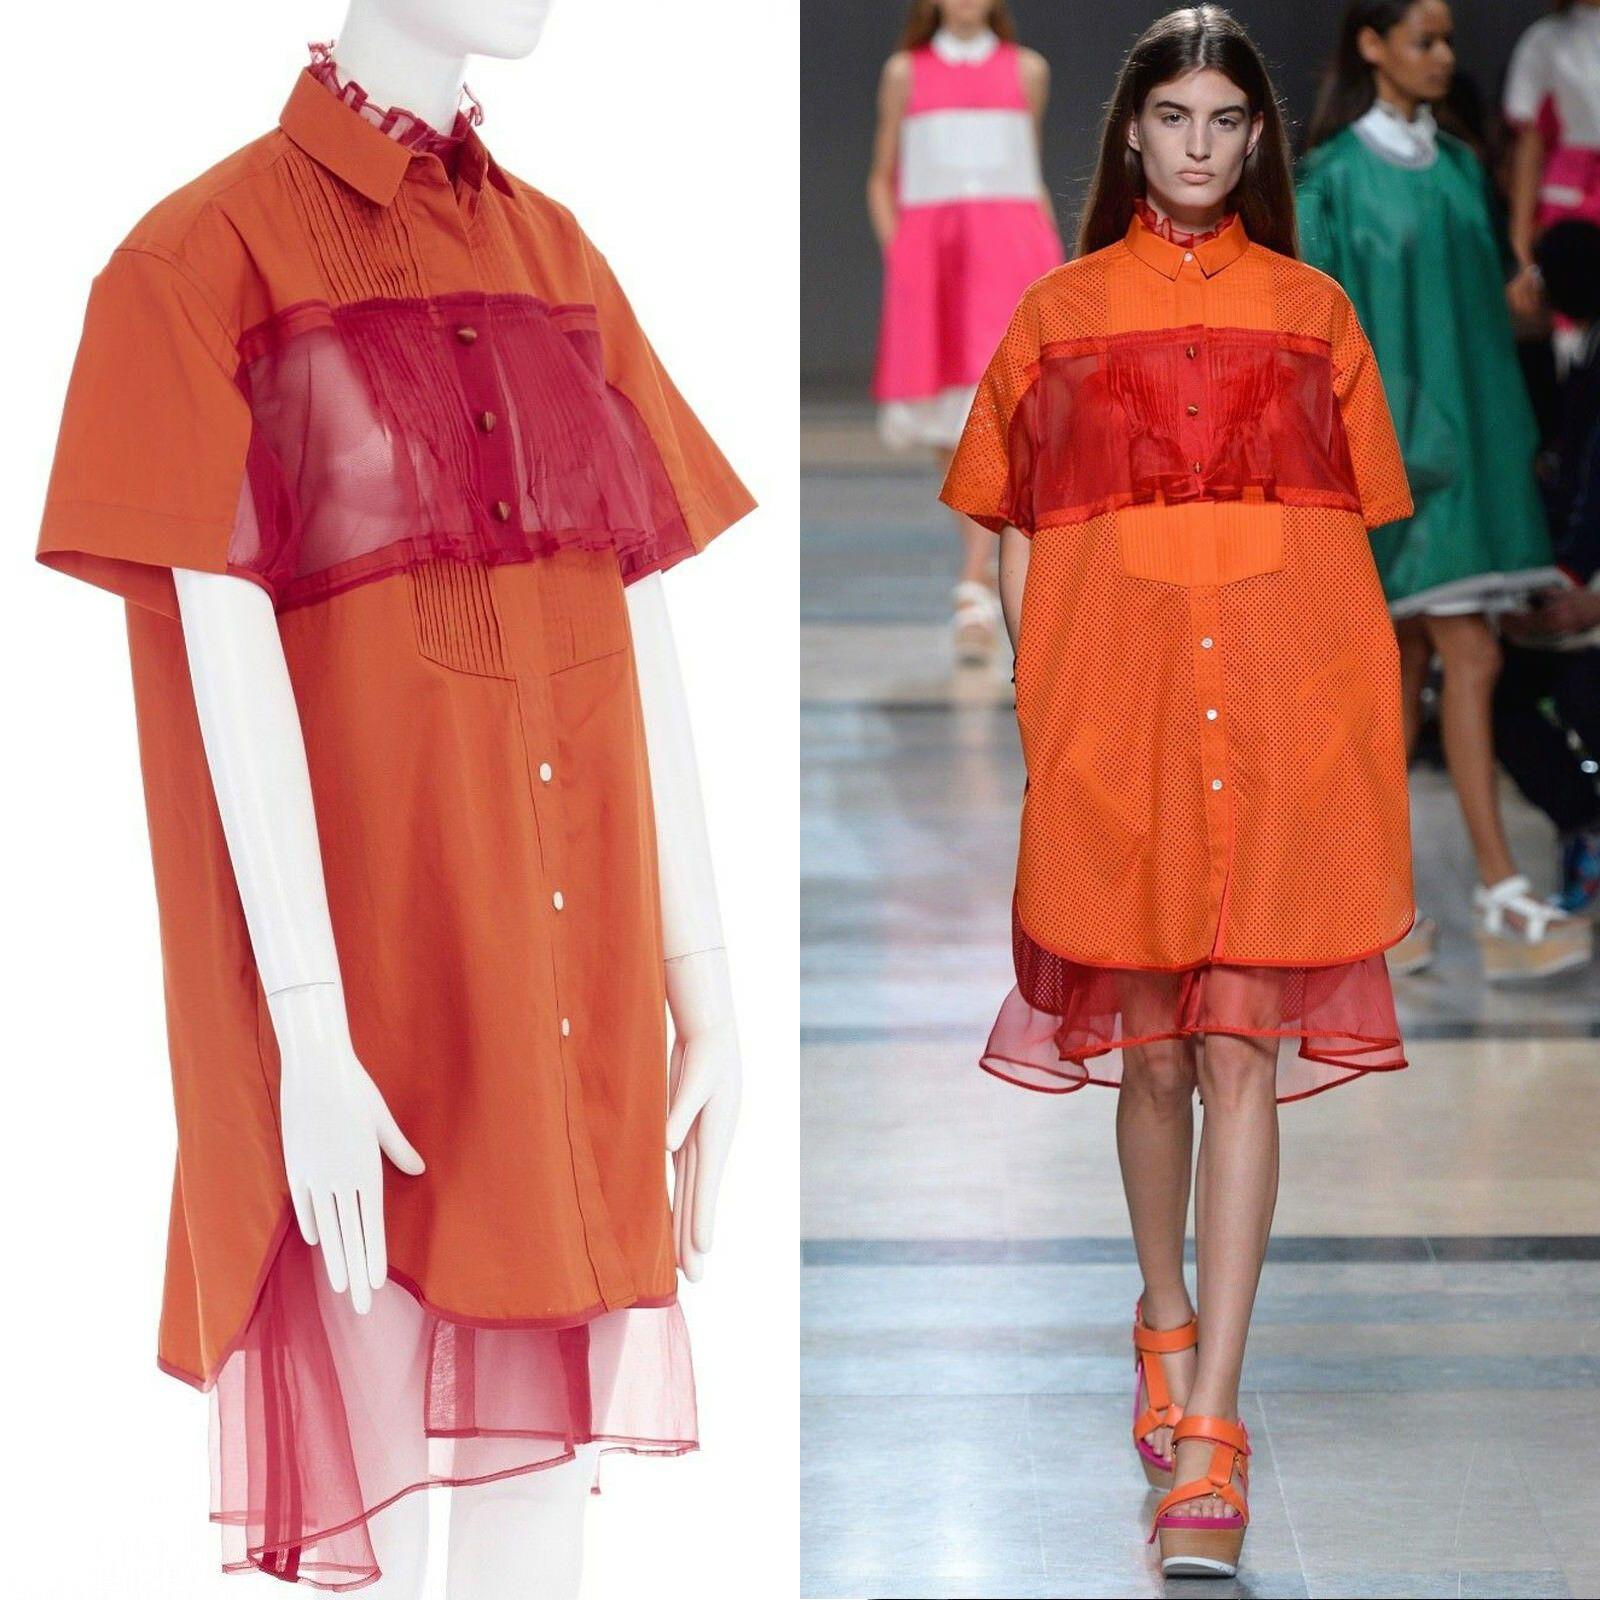 runway SACAI SS14 orange polyester panel pleated collar cotton shirt dress JP1 S
SACAI
FROM THE SPRING SUMMER 2014 RUNWAY
Cotton, silk, polyester. Spread collar. 
Pleated bib front. Red polyester panel block at chest.
Fabric covered buttons. Rounded